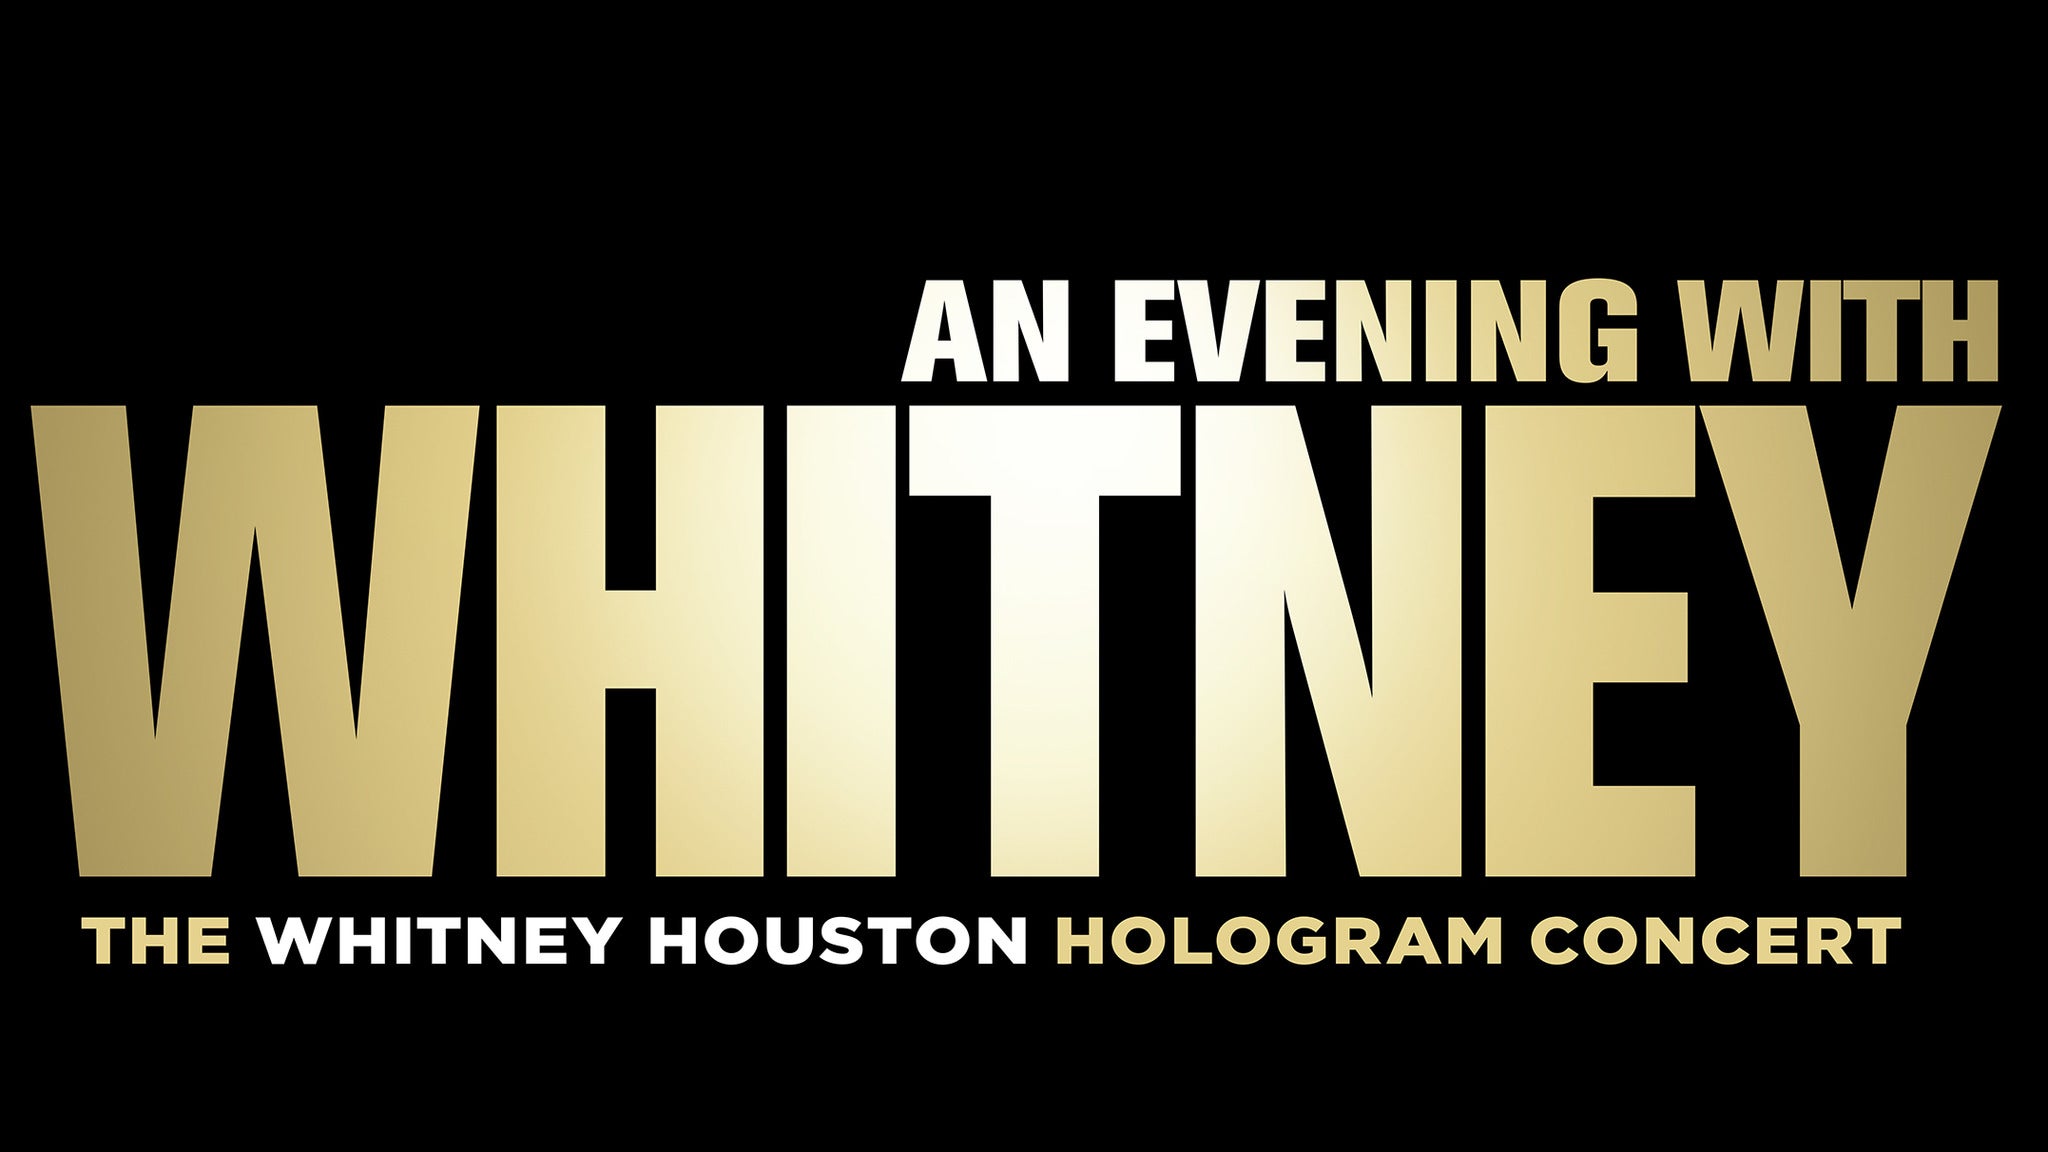 An Evening With Whitney The Whitney Houston Hologram Concert (Las